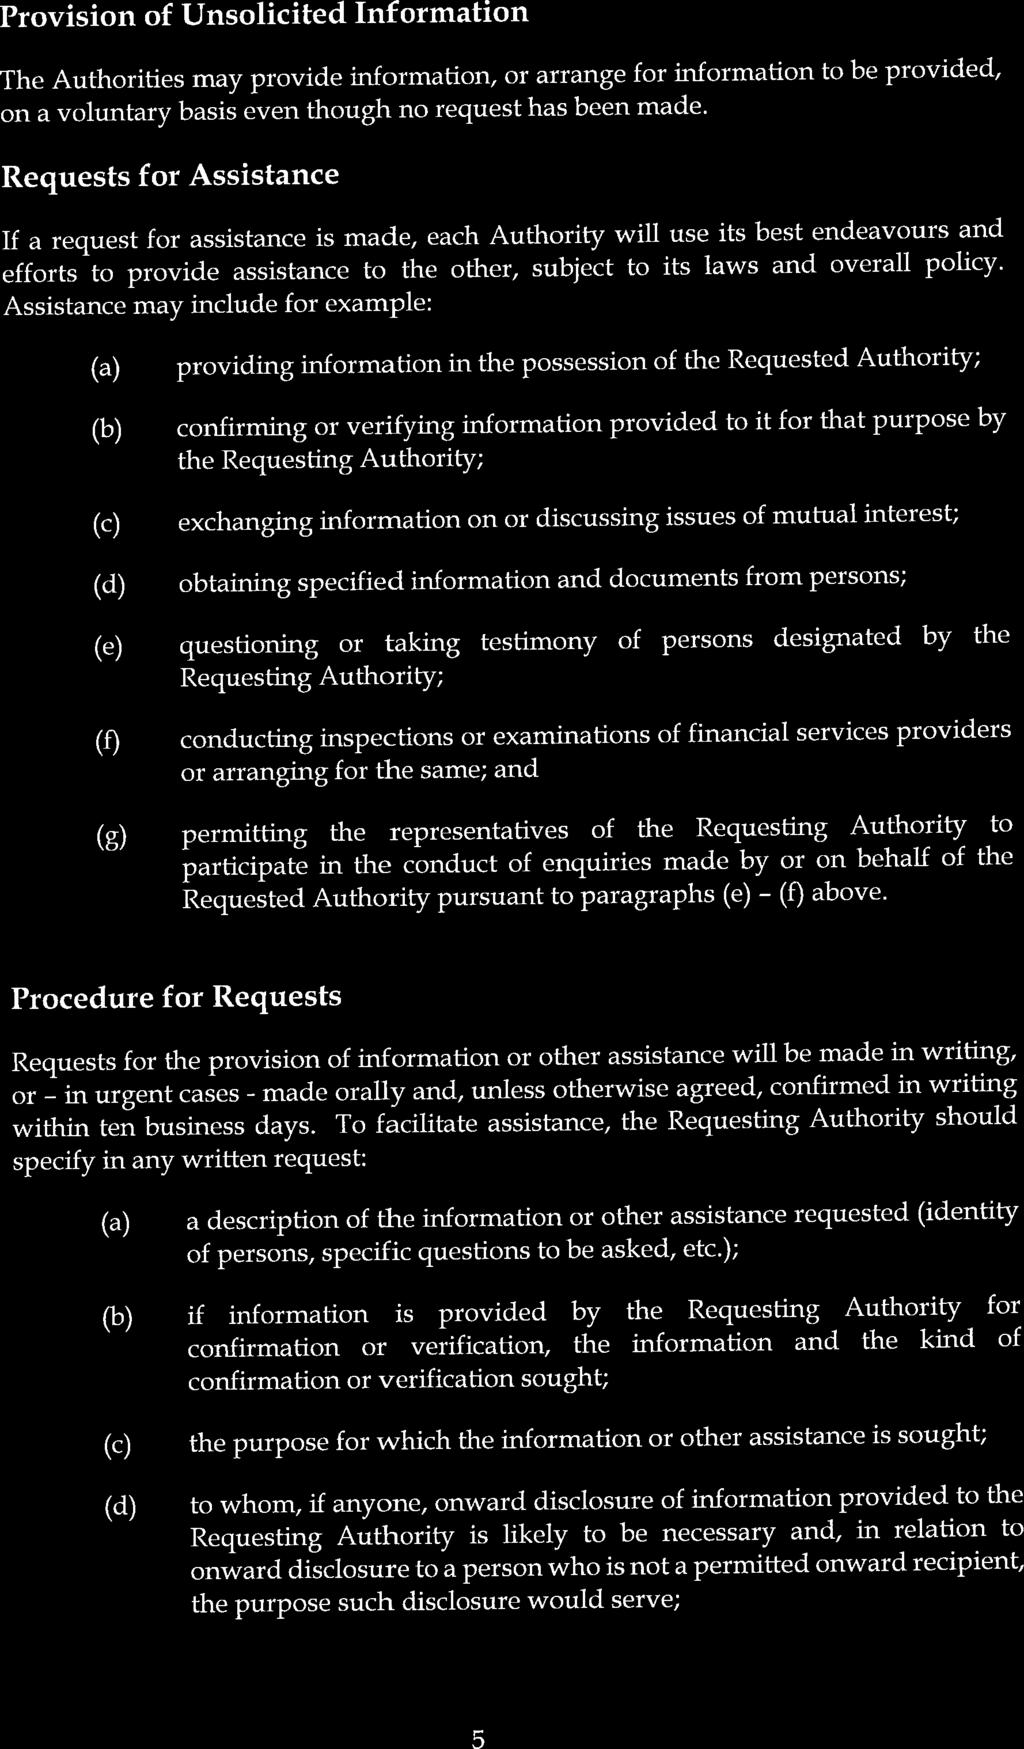 3. Provision of Unsolicited Information The Authorities may provide information, or arrange for information to be provided, on a voluntary basis even though no request has been made. 4.